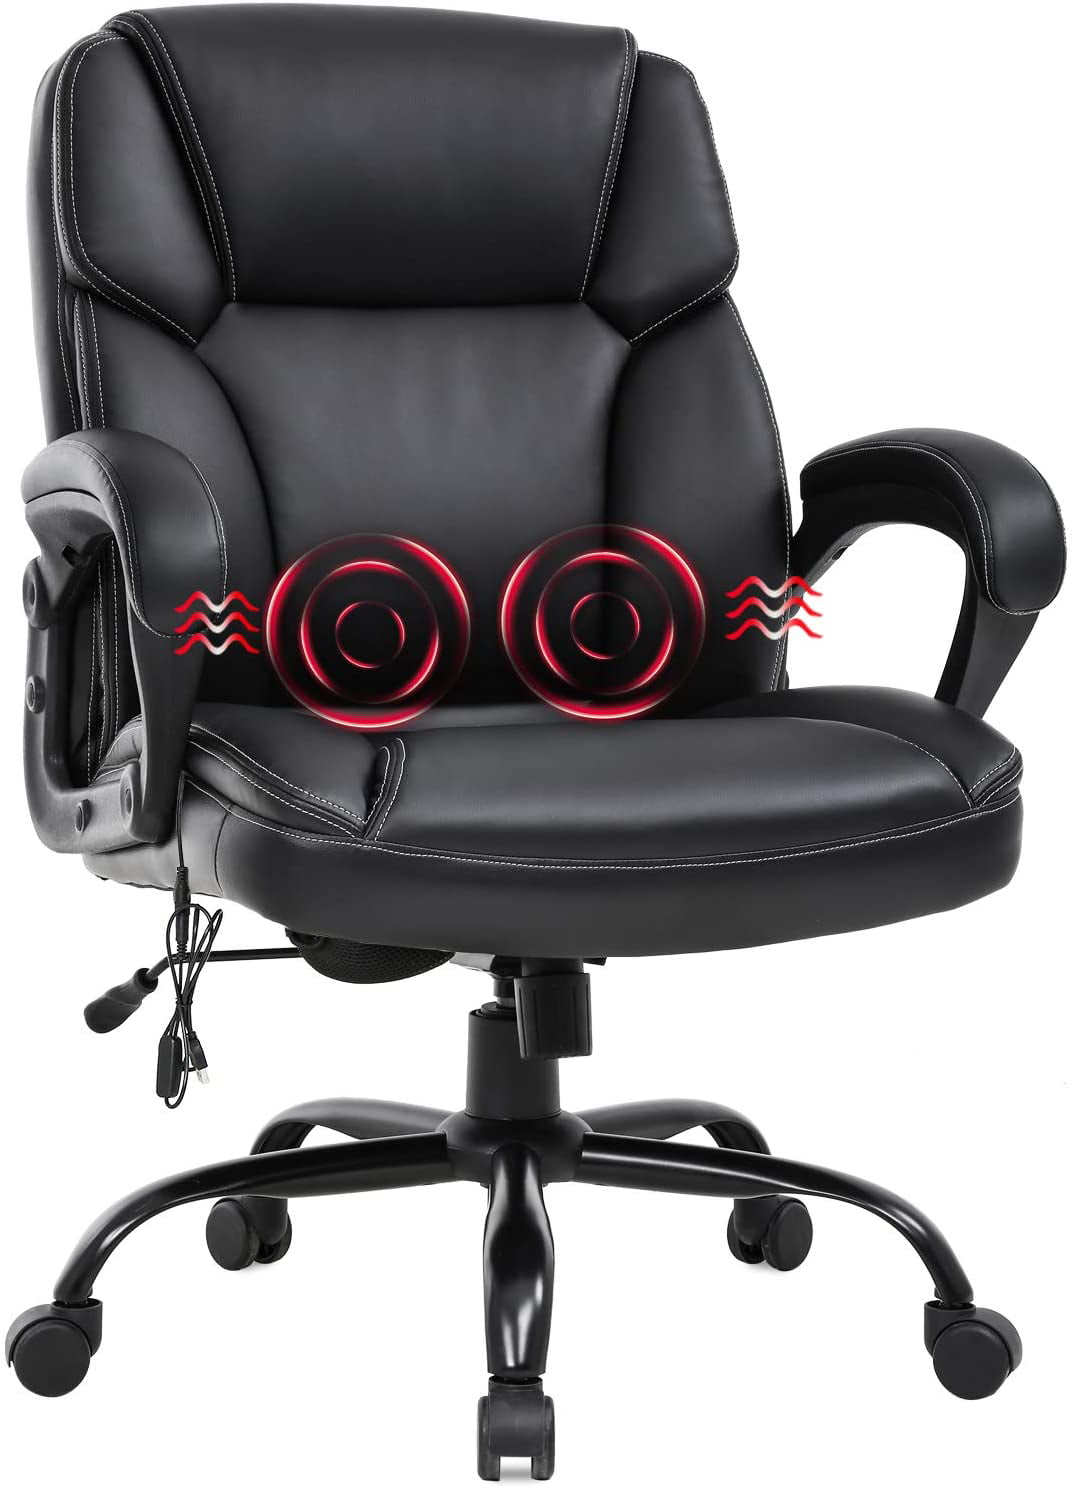 NEXOES Big and Tall Office Chair 400lbs Wide Seat Massage Computer